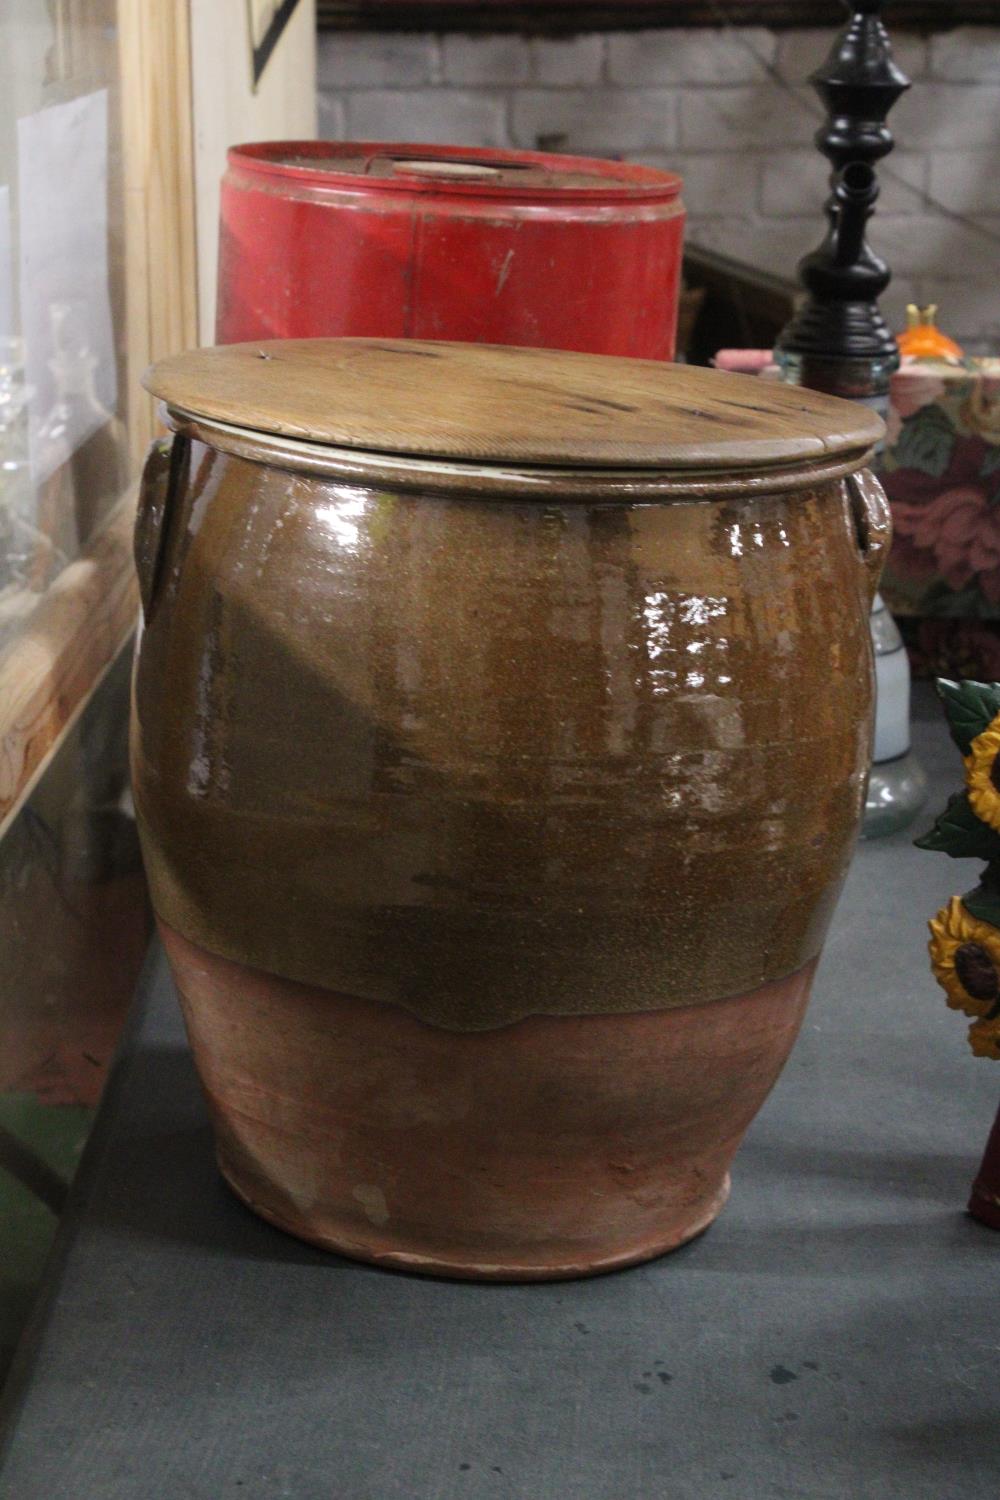 A LARGE HEAVY STONEWARE POT WITH A WOODEN LID, HEIGHT 38CM, DIAMETER 32CM